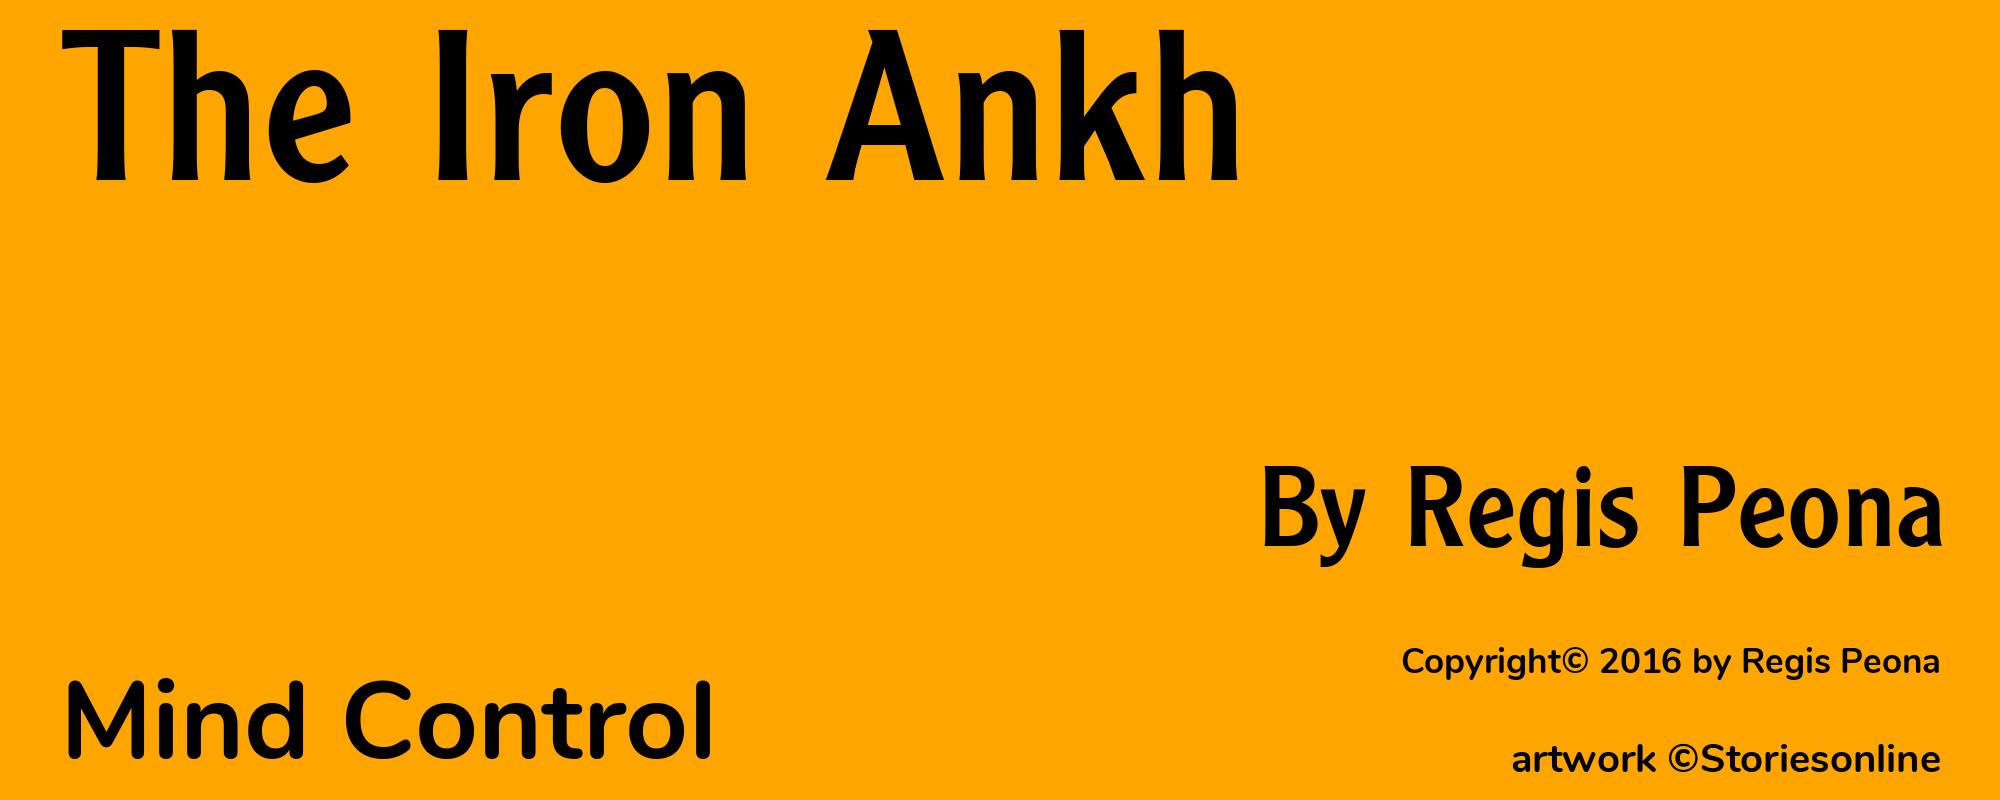 The Iron Ankh - Cover